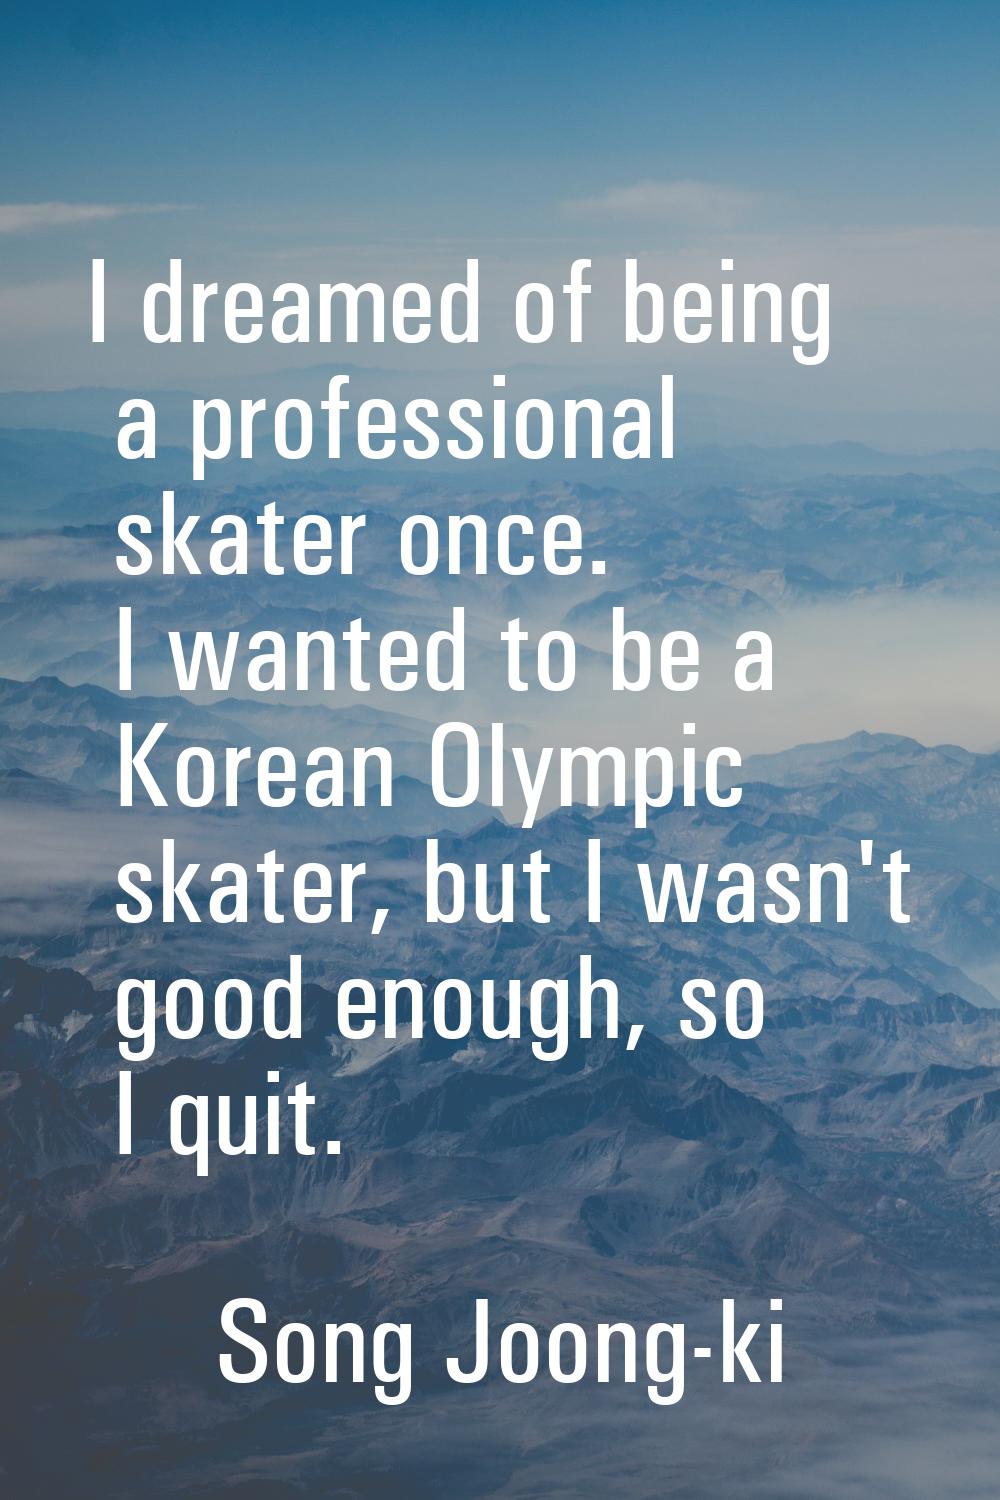 I dreamed of being a professional skater once. I wanted to be a Korean Olympic skater, but I wasn't